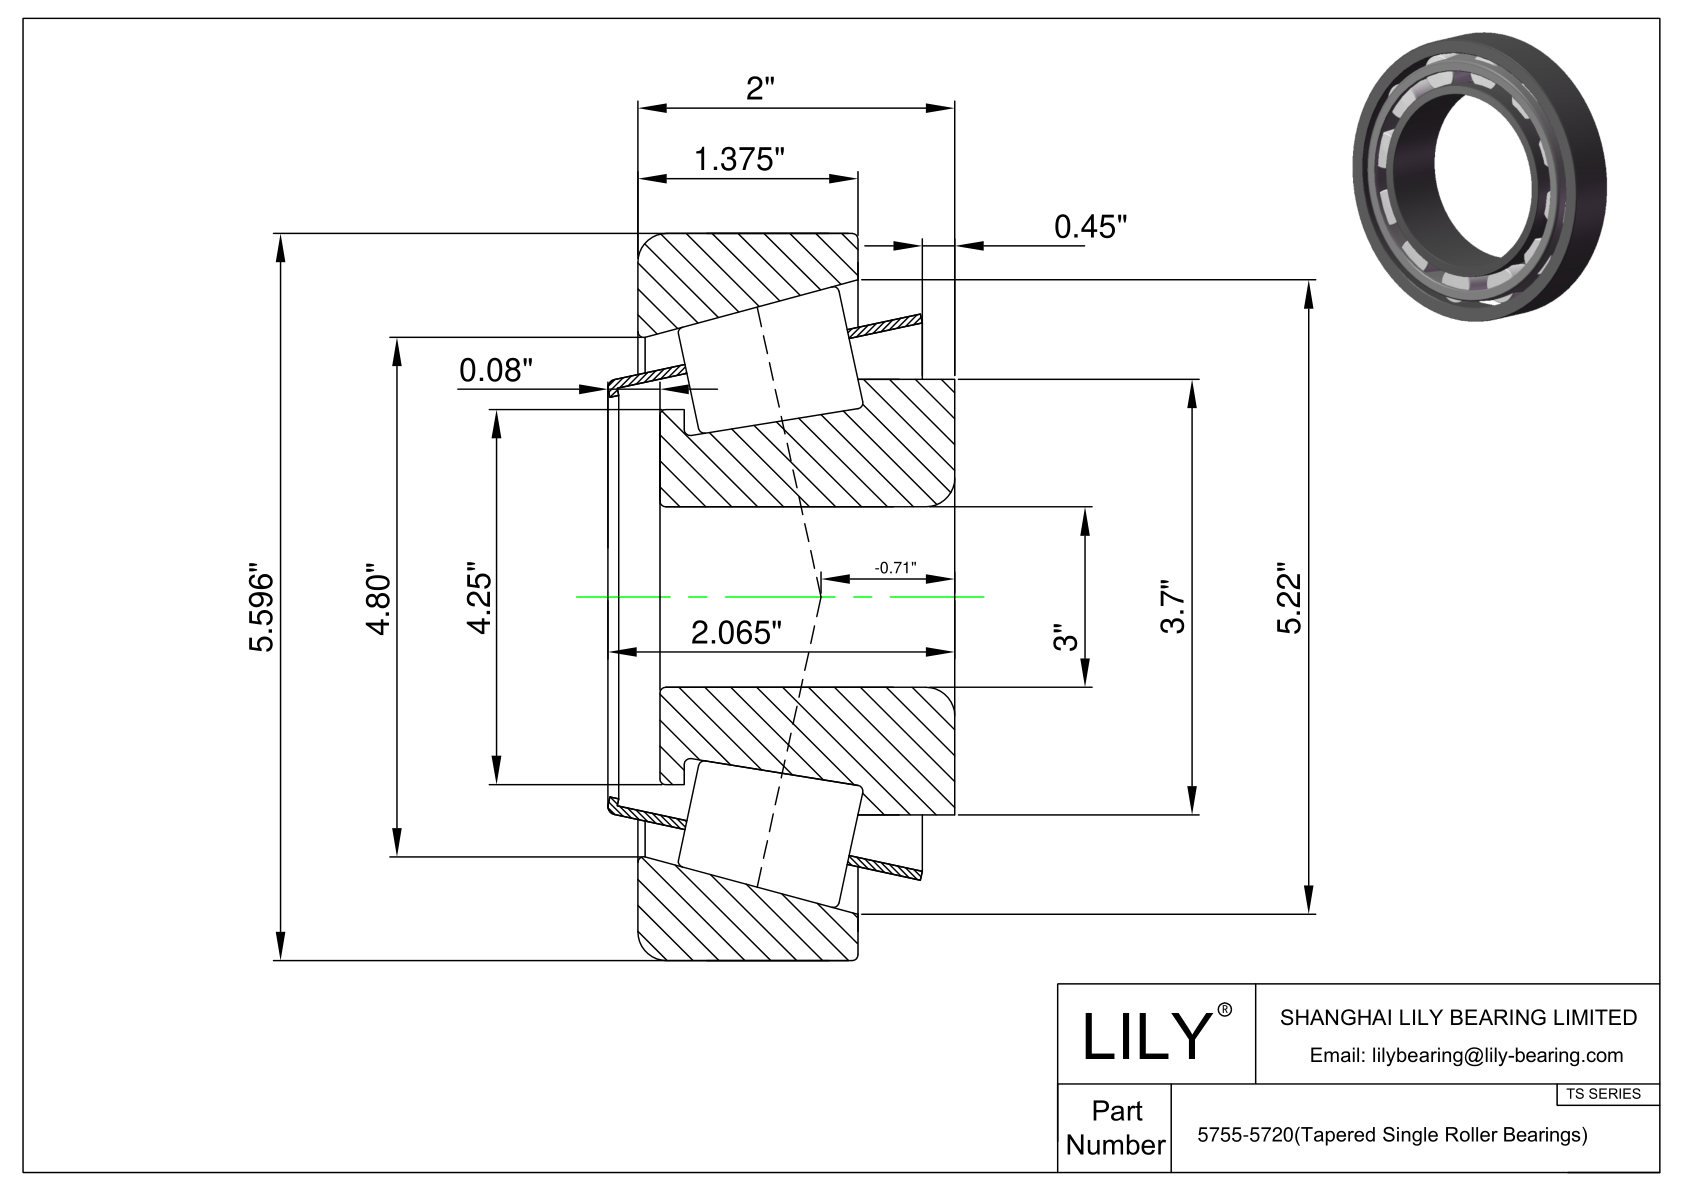 5755-5720 TS (Tapered Single Roller Bearings) (Imperial) cad drawing